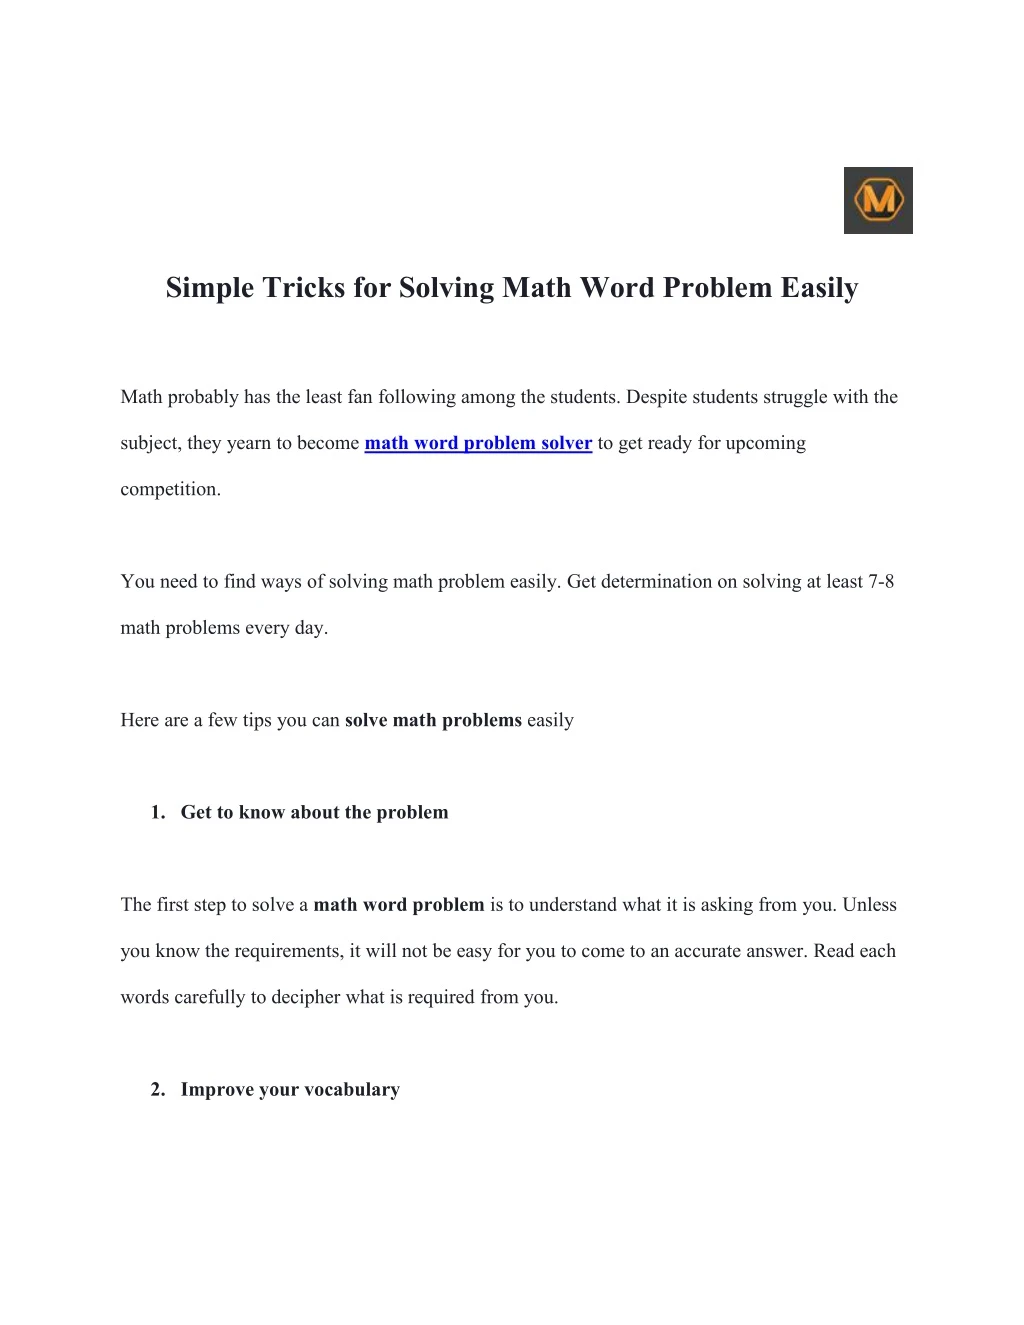 simple tricks for solving math word problem easily